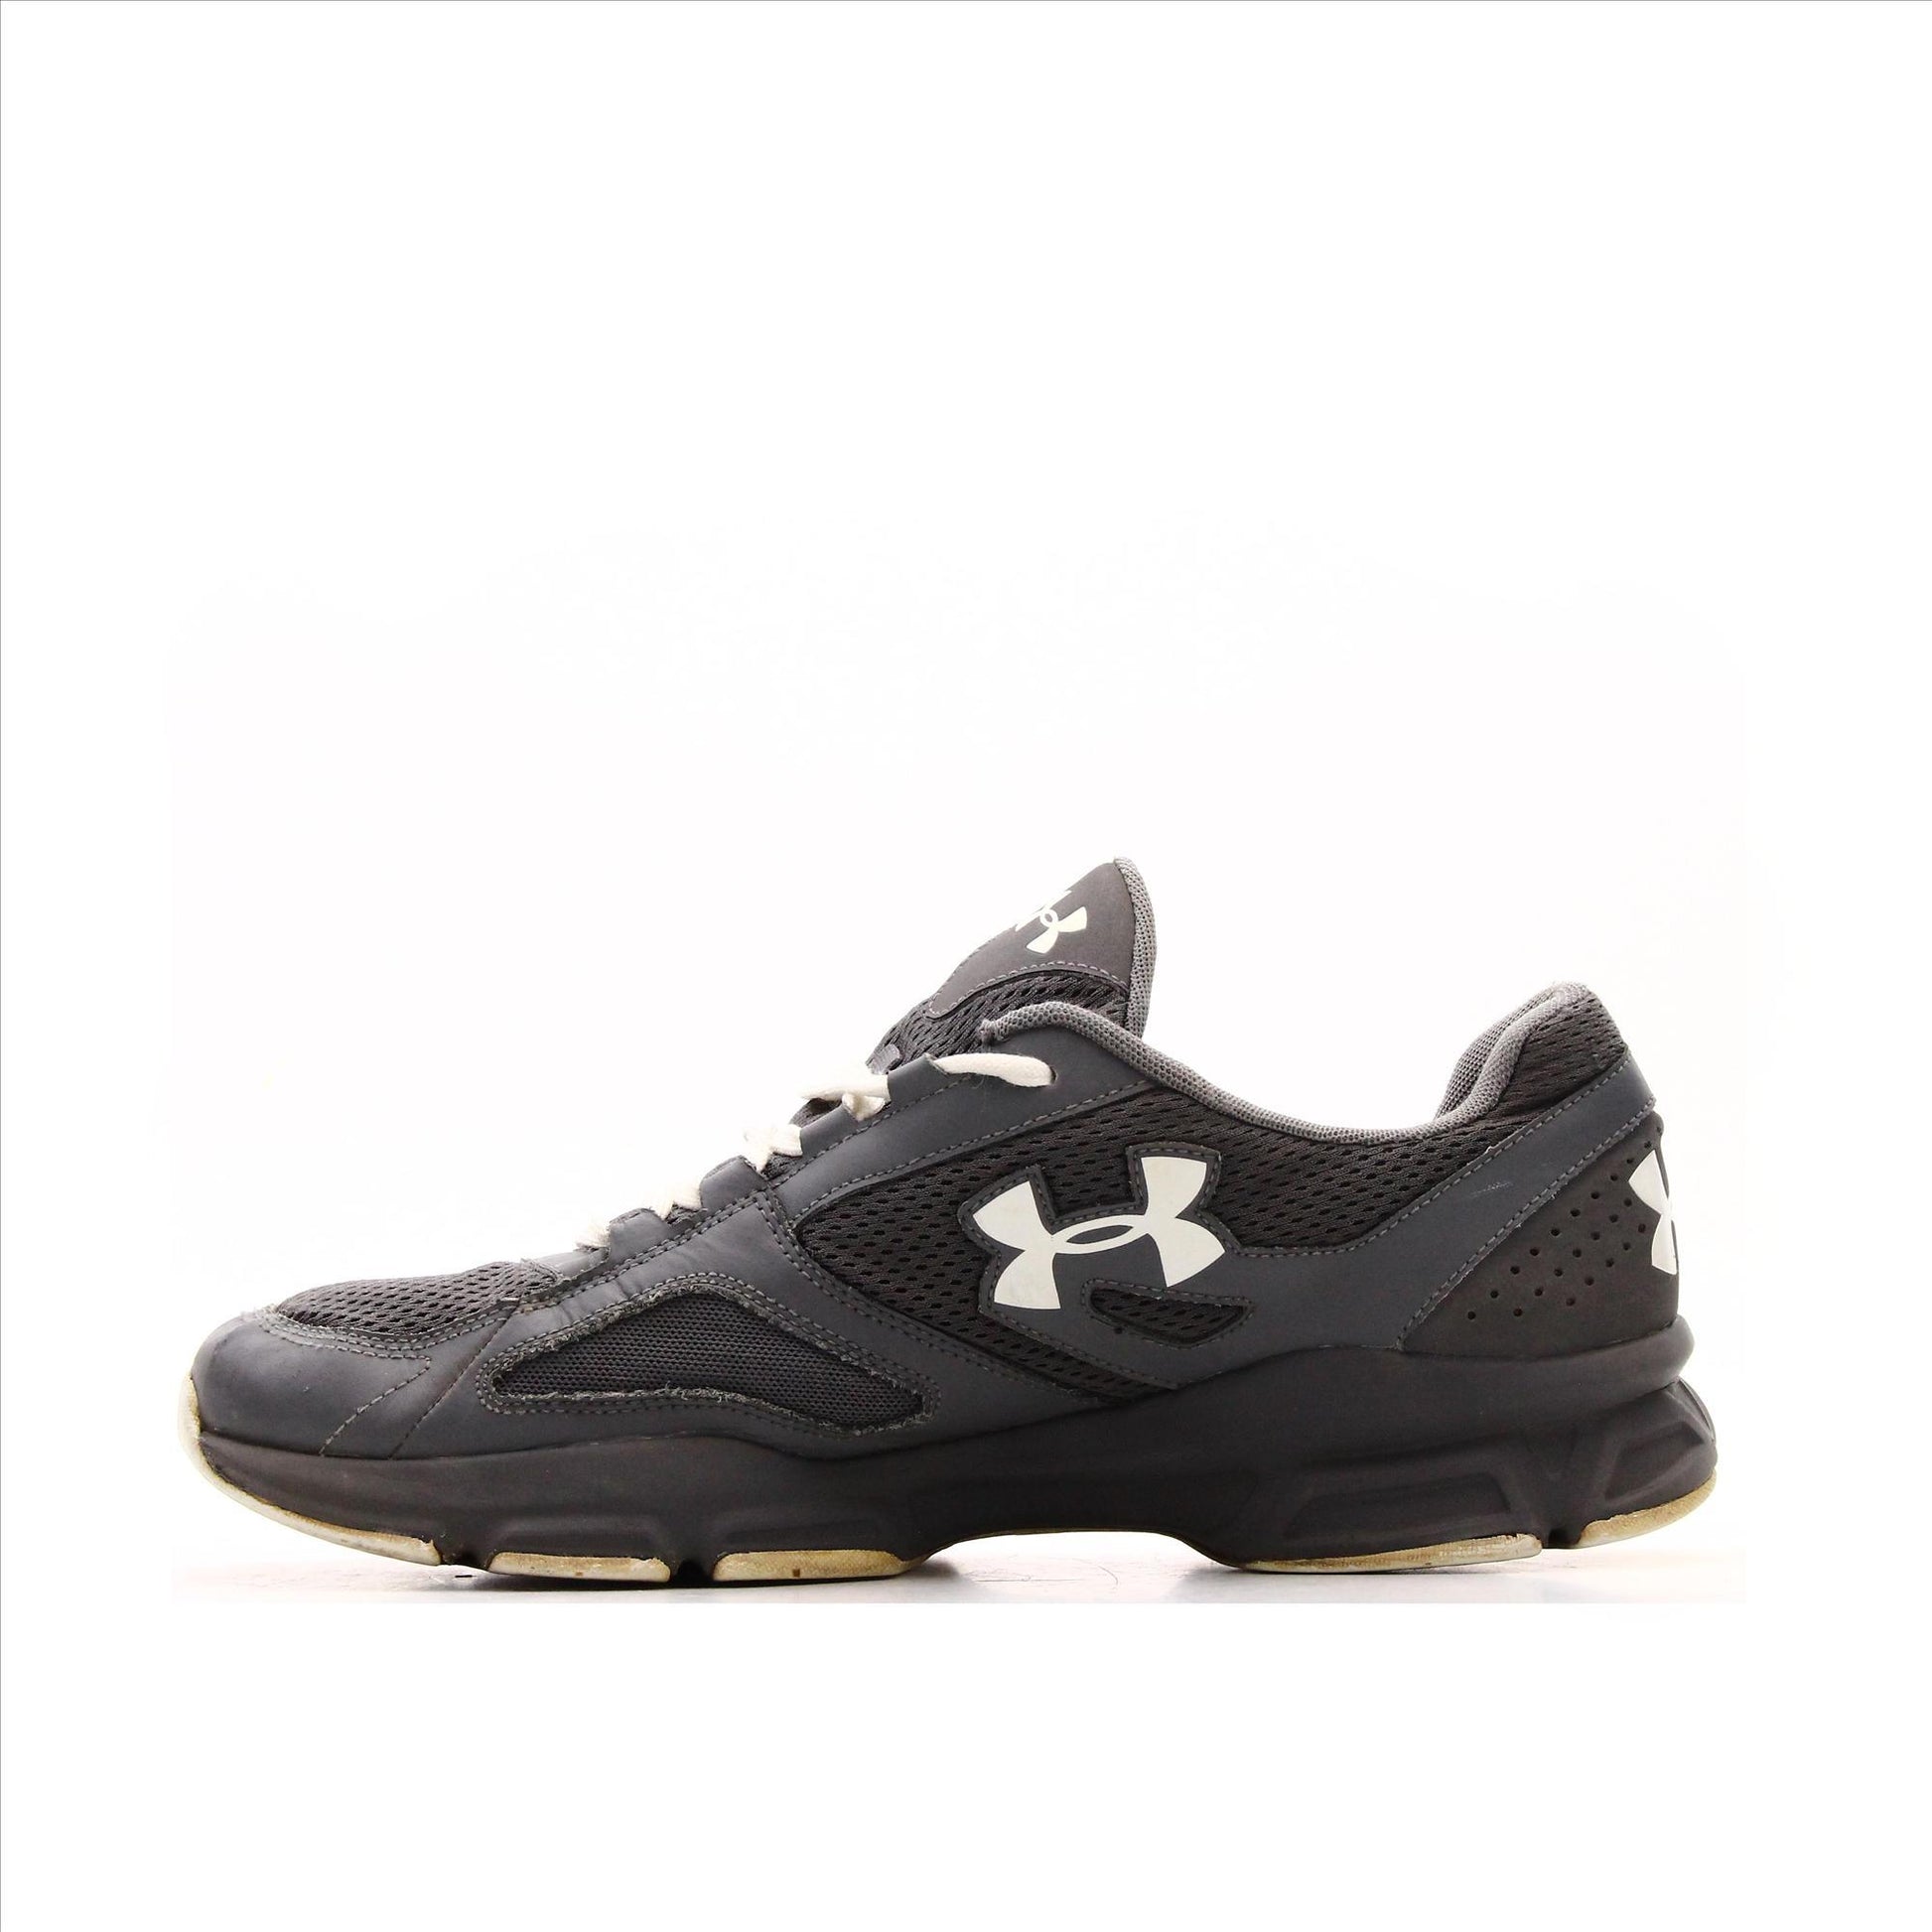 Under Armour Sports